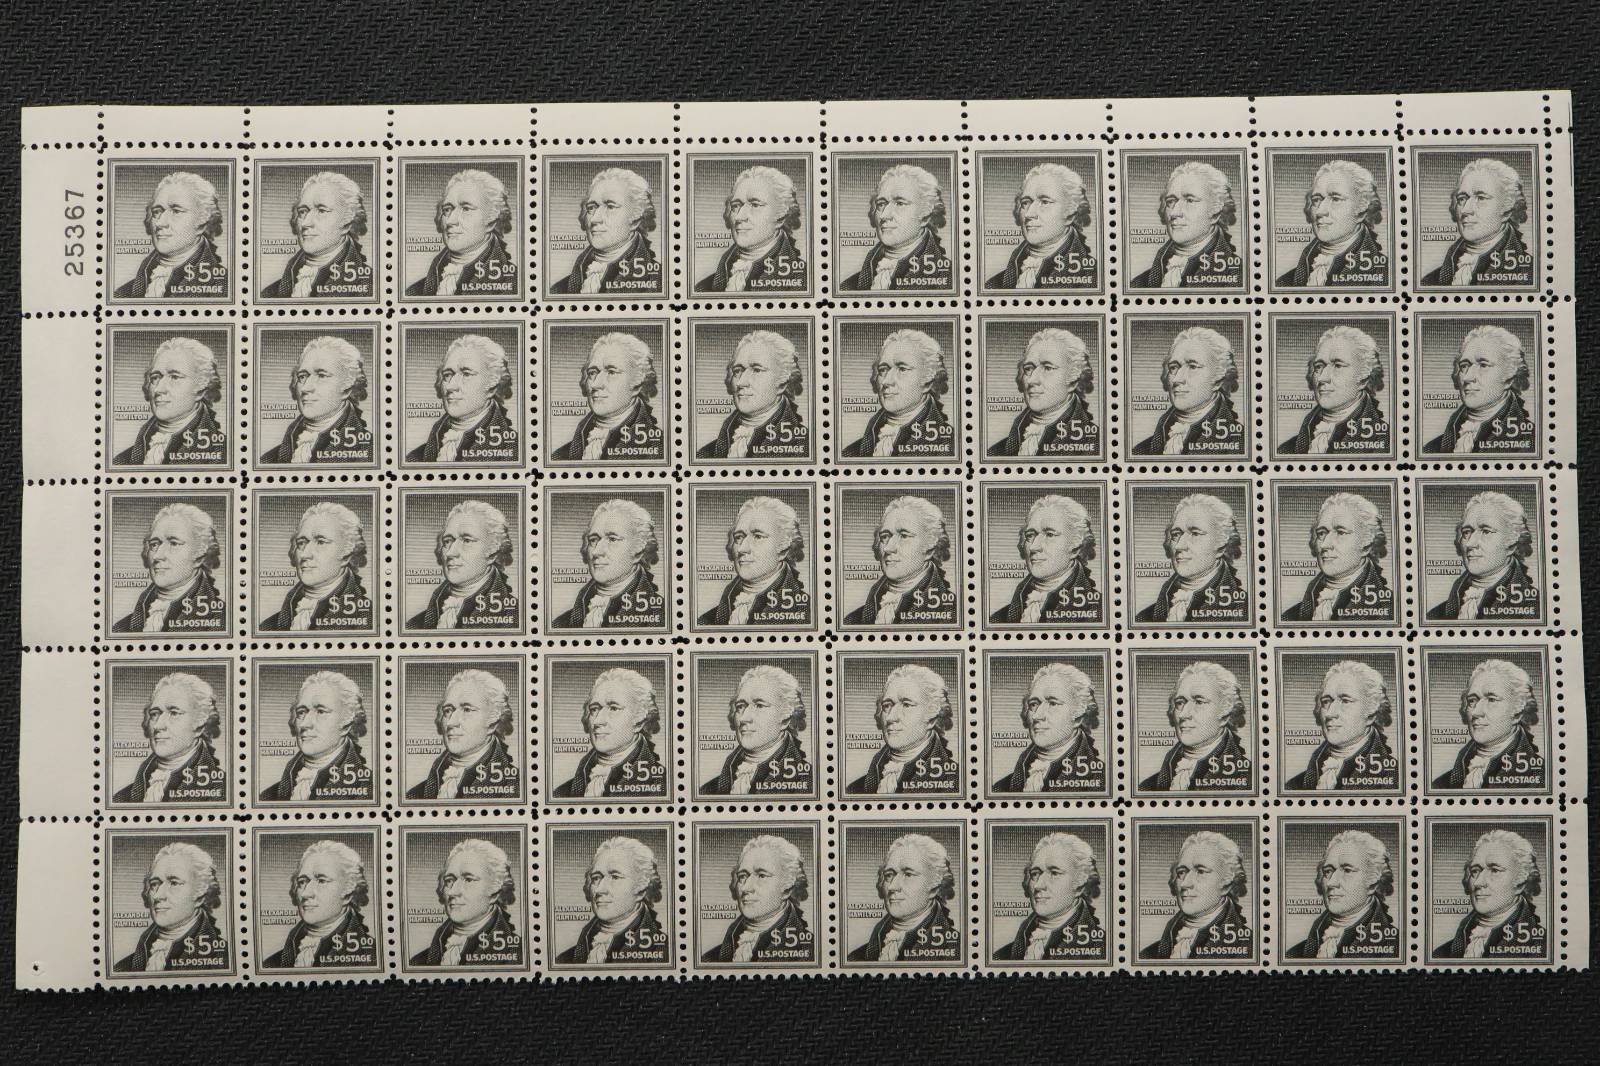 Scarce US #1053 Mint NH Half Sheet of 50 = $2,500 CV $5 Hamilton

Auction ends: TODAY, Saturday May 11th at 8:23pm EST

View the auction and bid: https://www.ebay.com/itm/386974679039